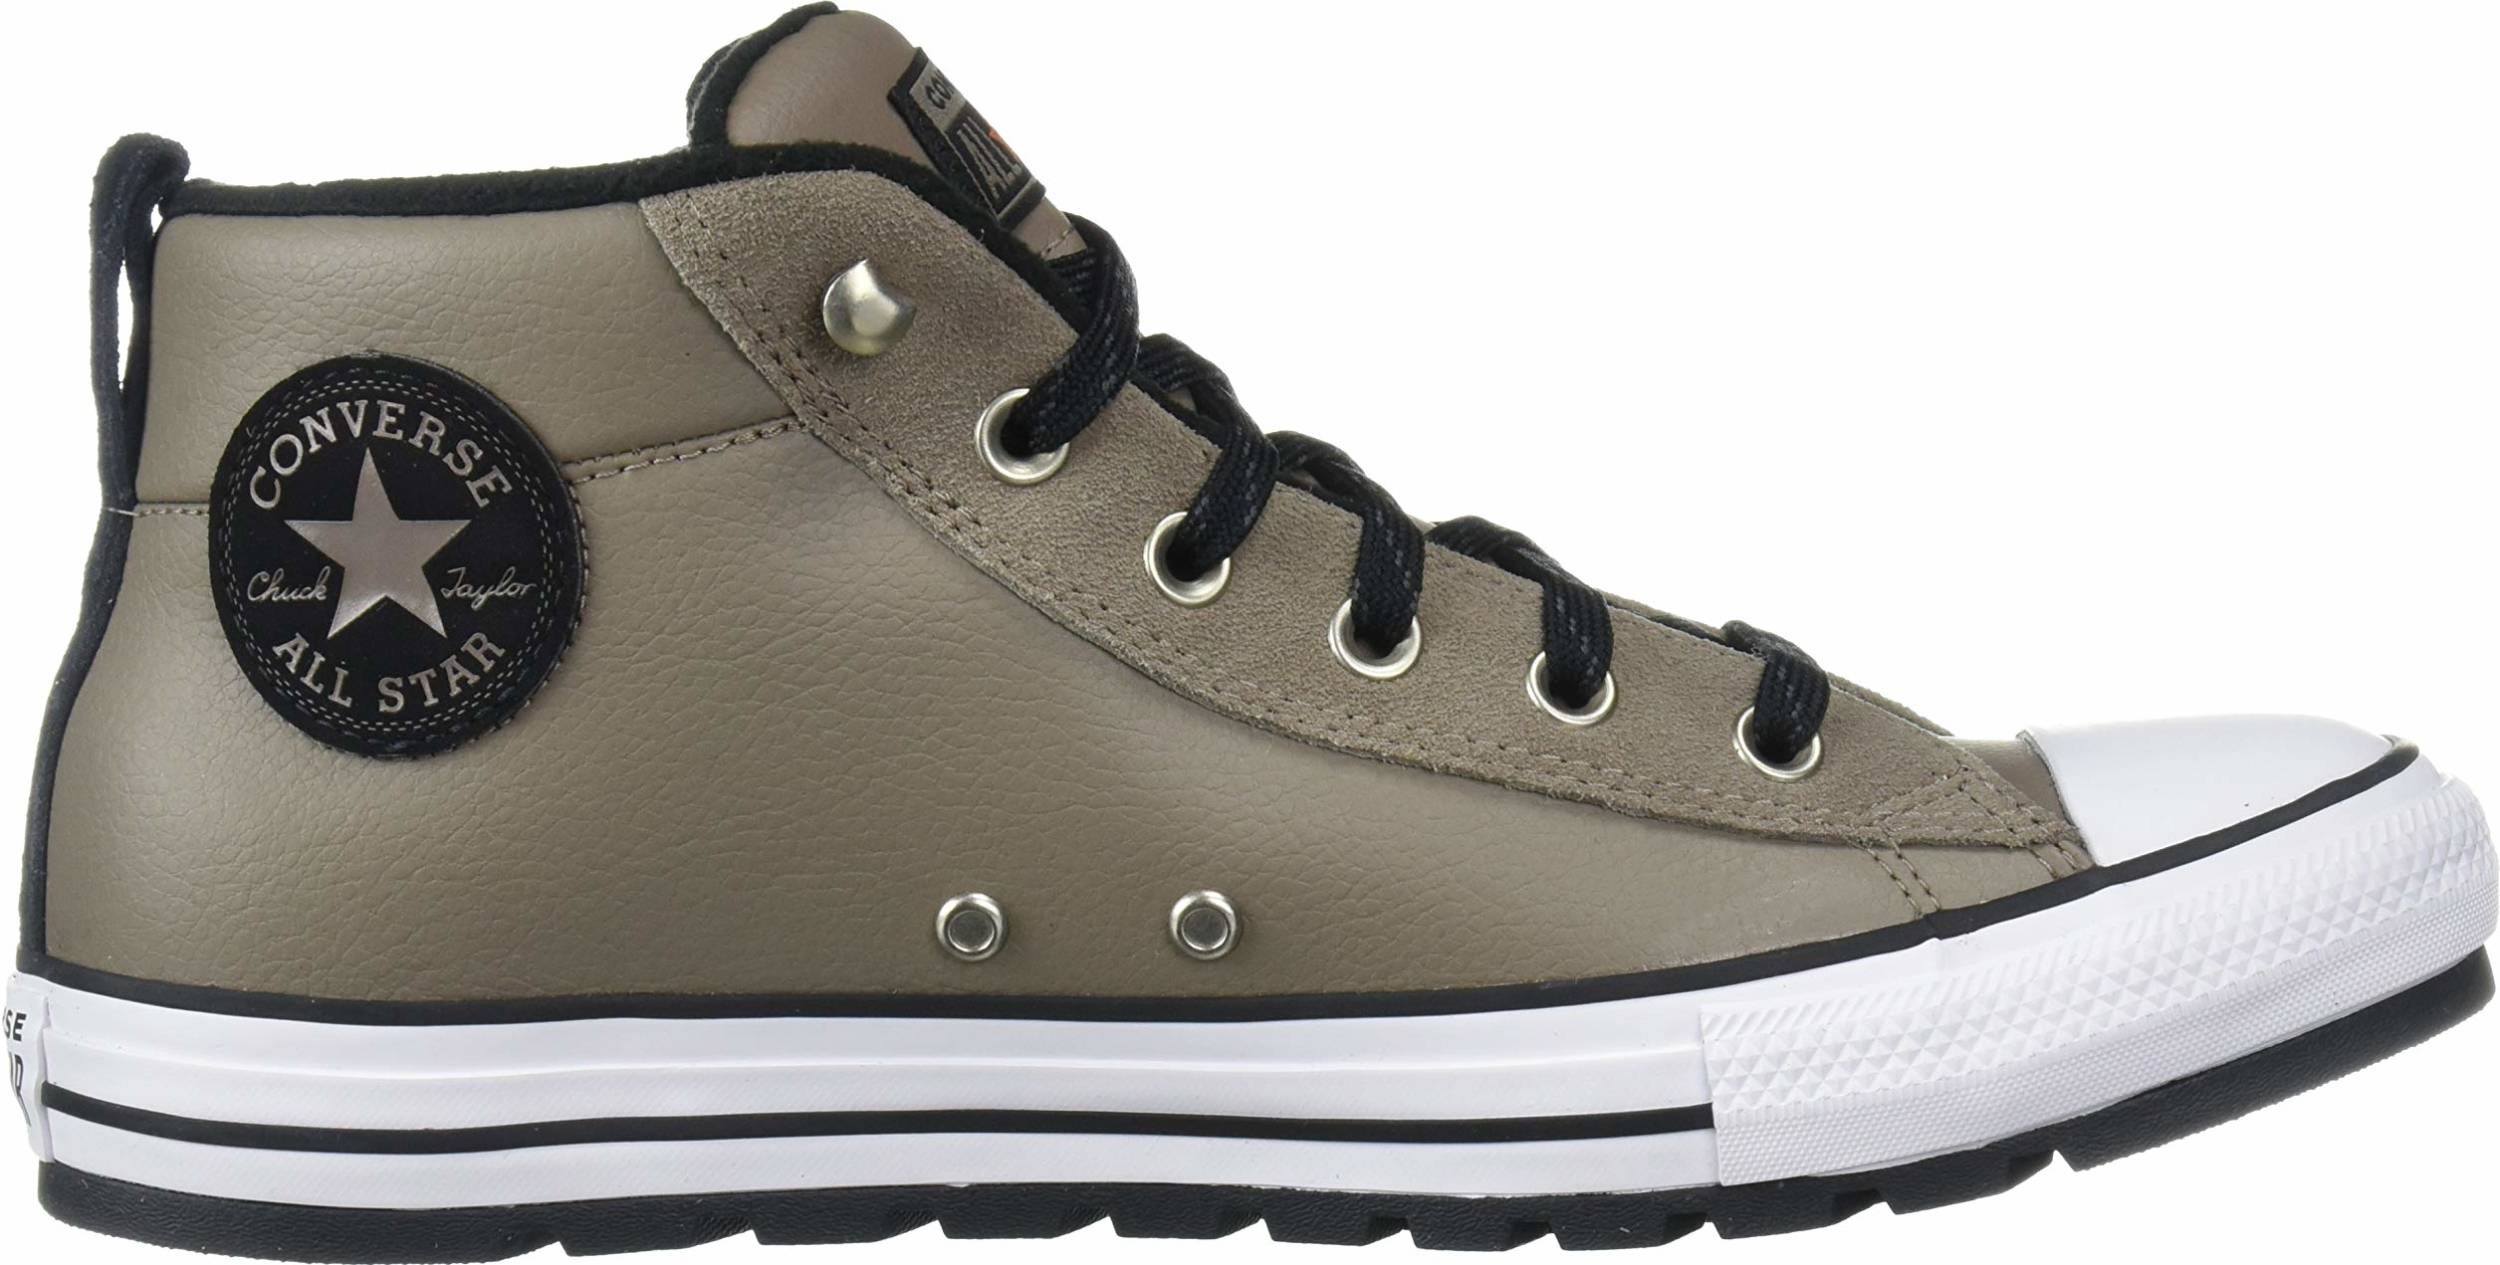 Converse Taylor All Star Street Mid sneakers (only £39) | RunRepeat